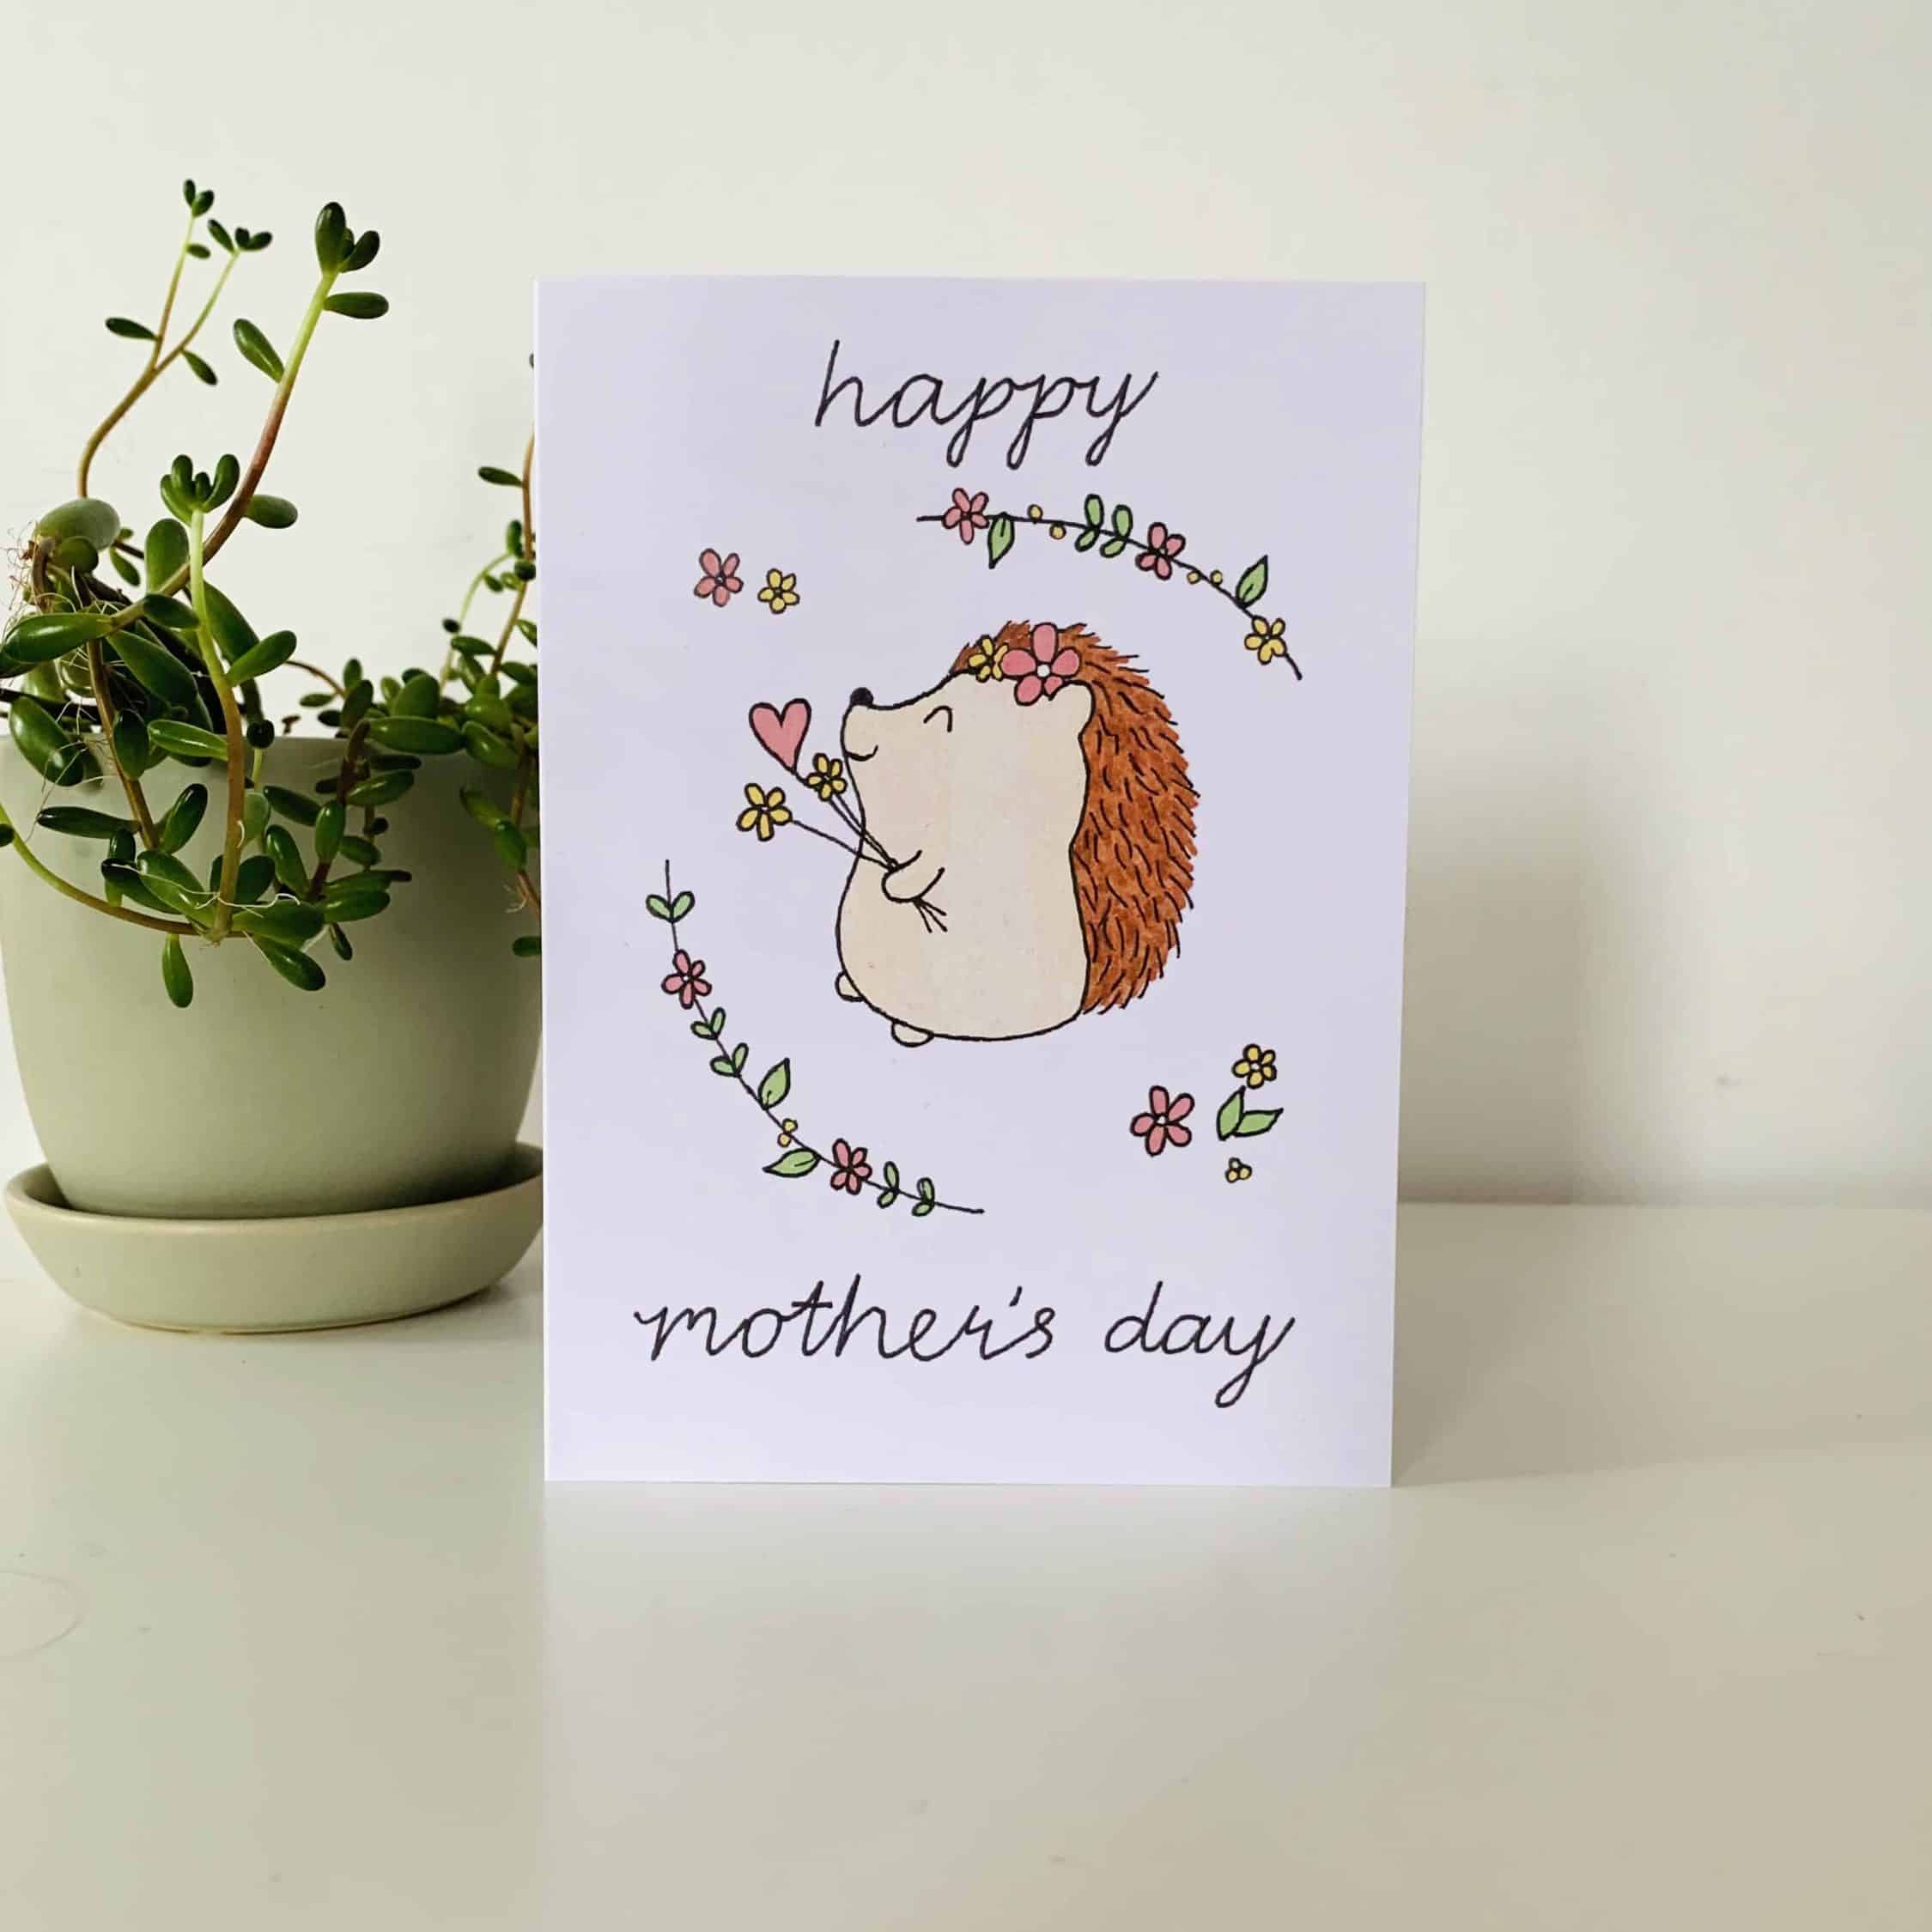 A Hedgehog Mother's Day Card from Sweet Pea Creations, decorated with an adorable illustration of a hedgehog surrounded by flowers, with the words "happy mother's day" written in a playful font.